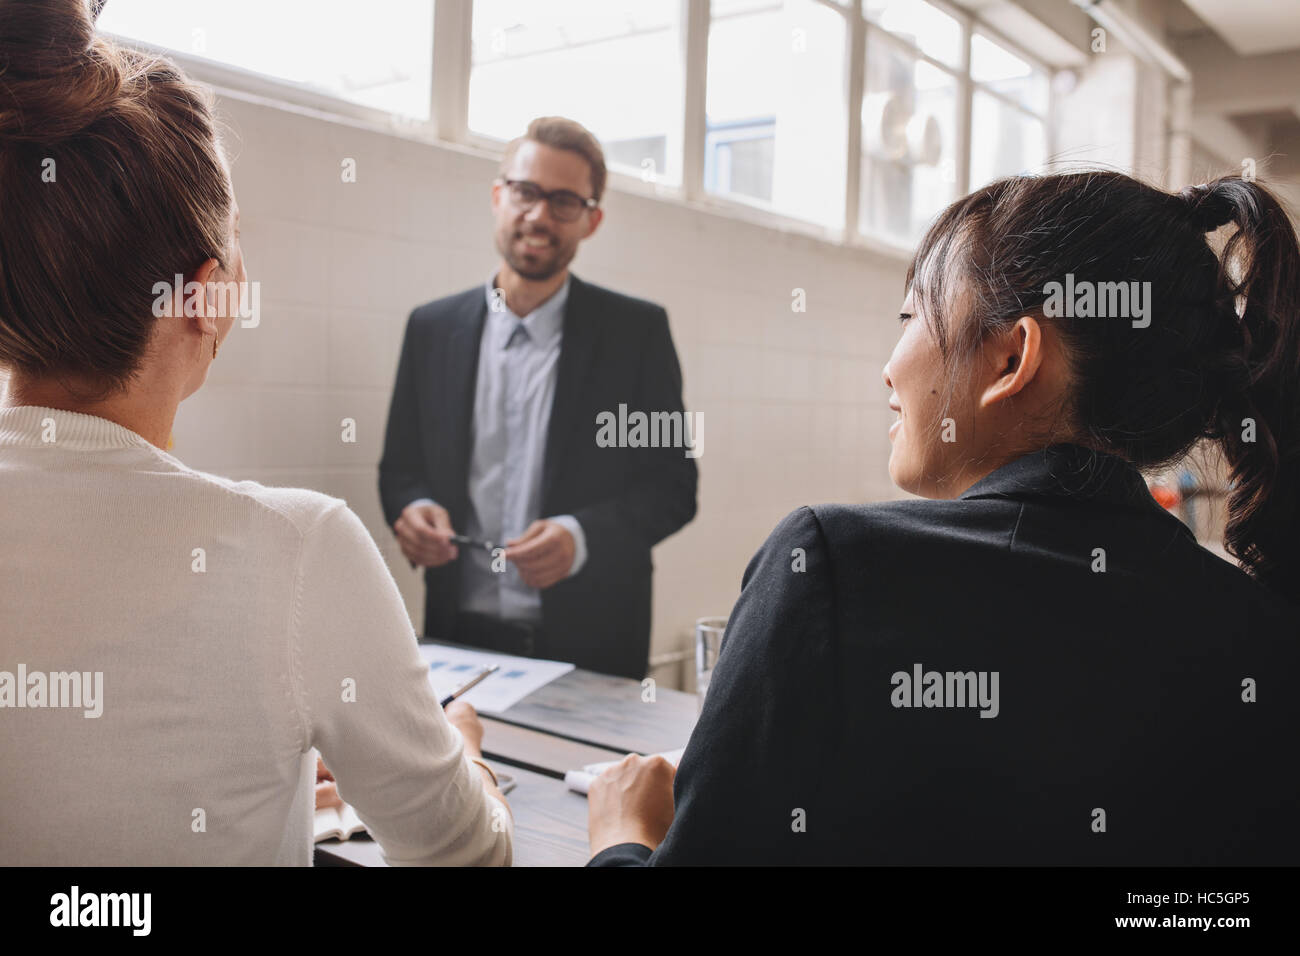 Two young woman sitting in a meeting in office, with businessman standing in background. Business presentation in meeting room. Stock Photo